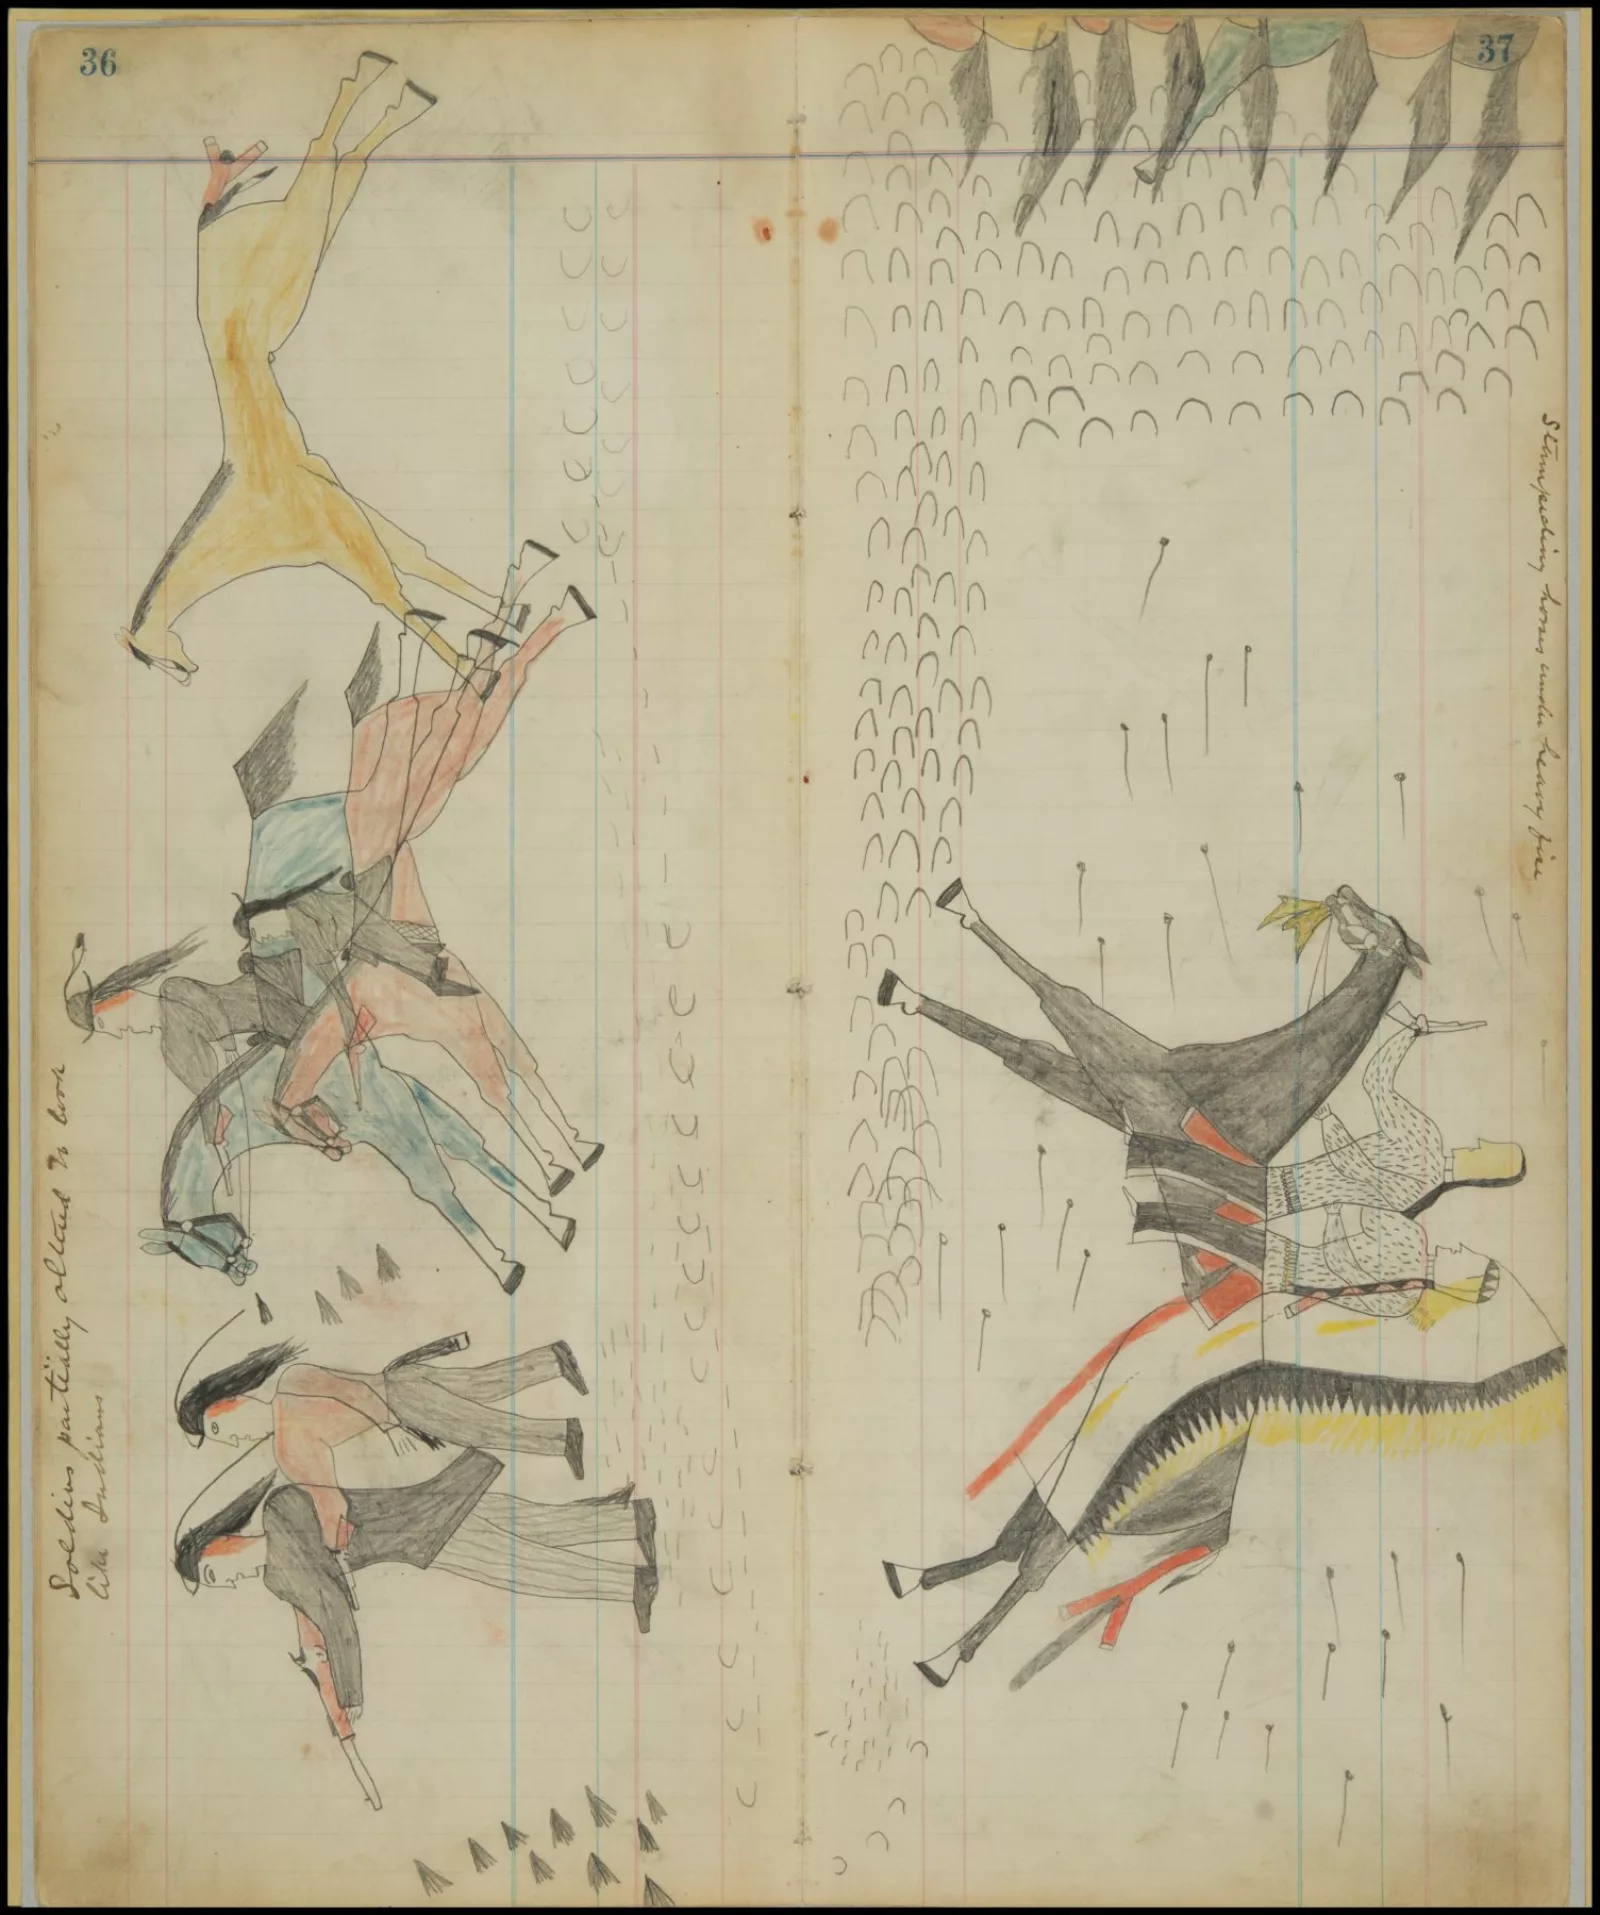 Horses and hoof prints cover a page in a ledger art book